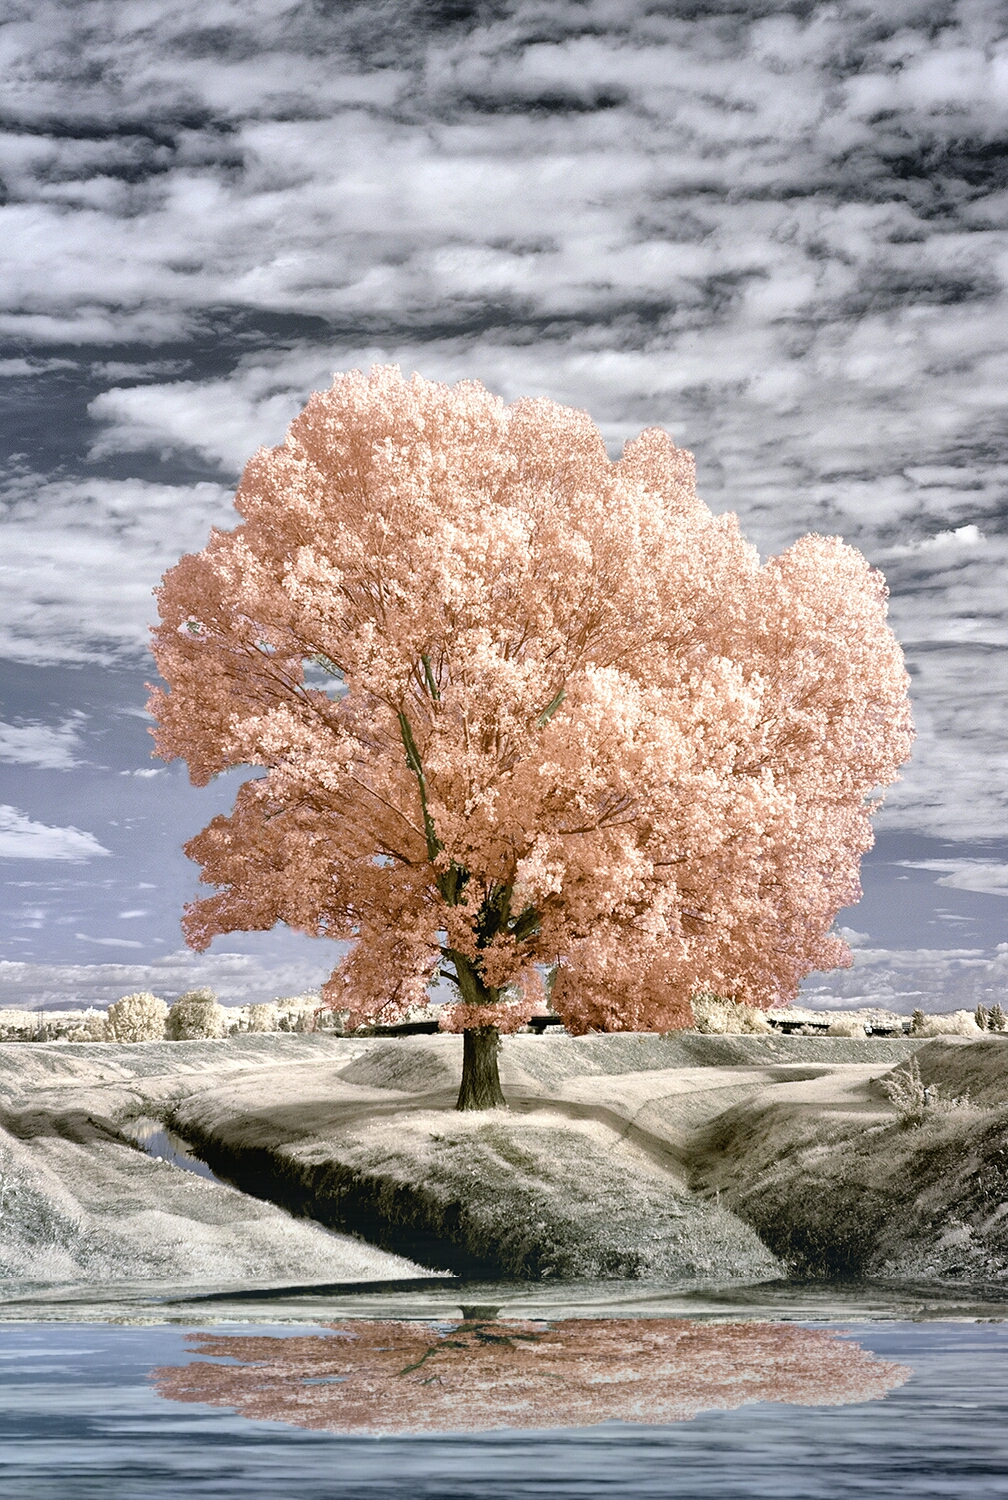 Playing with the ir...